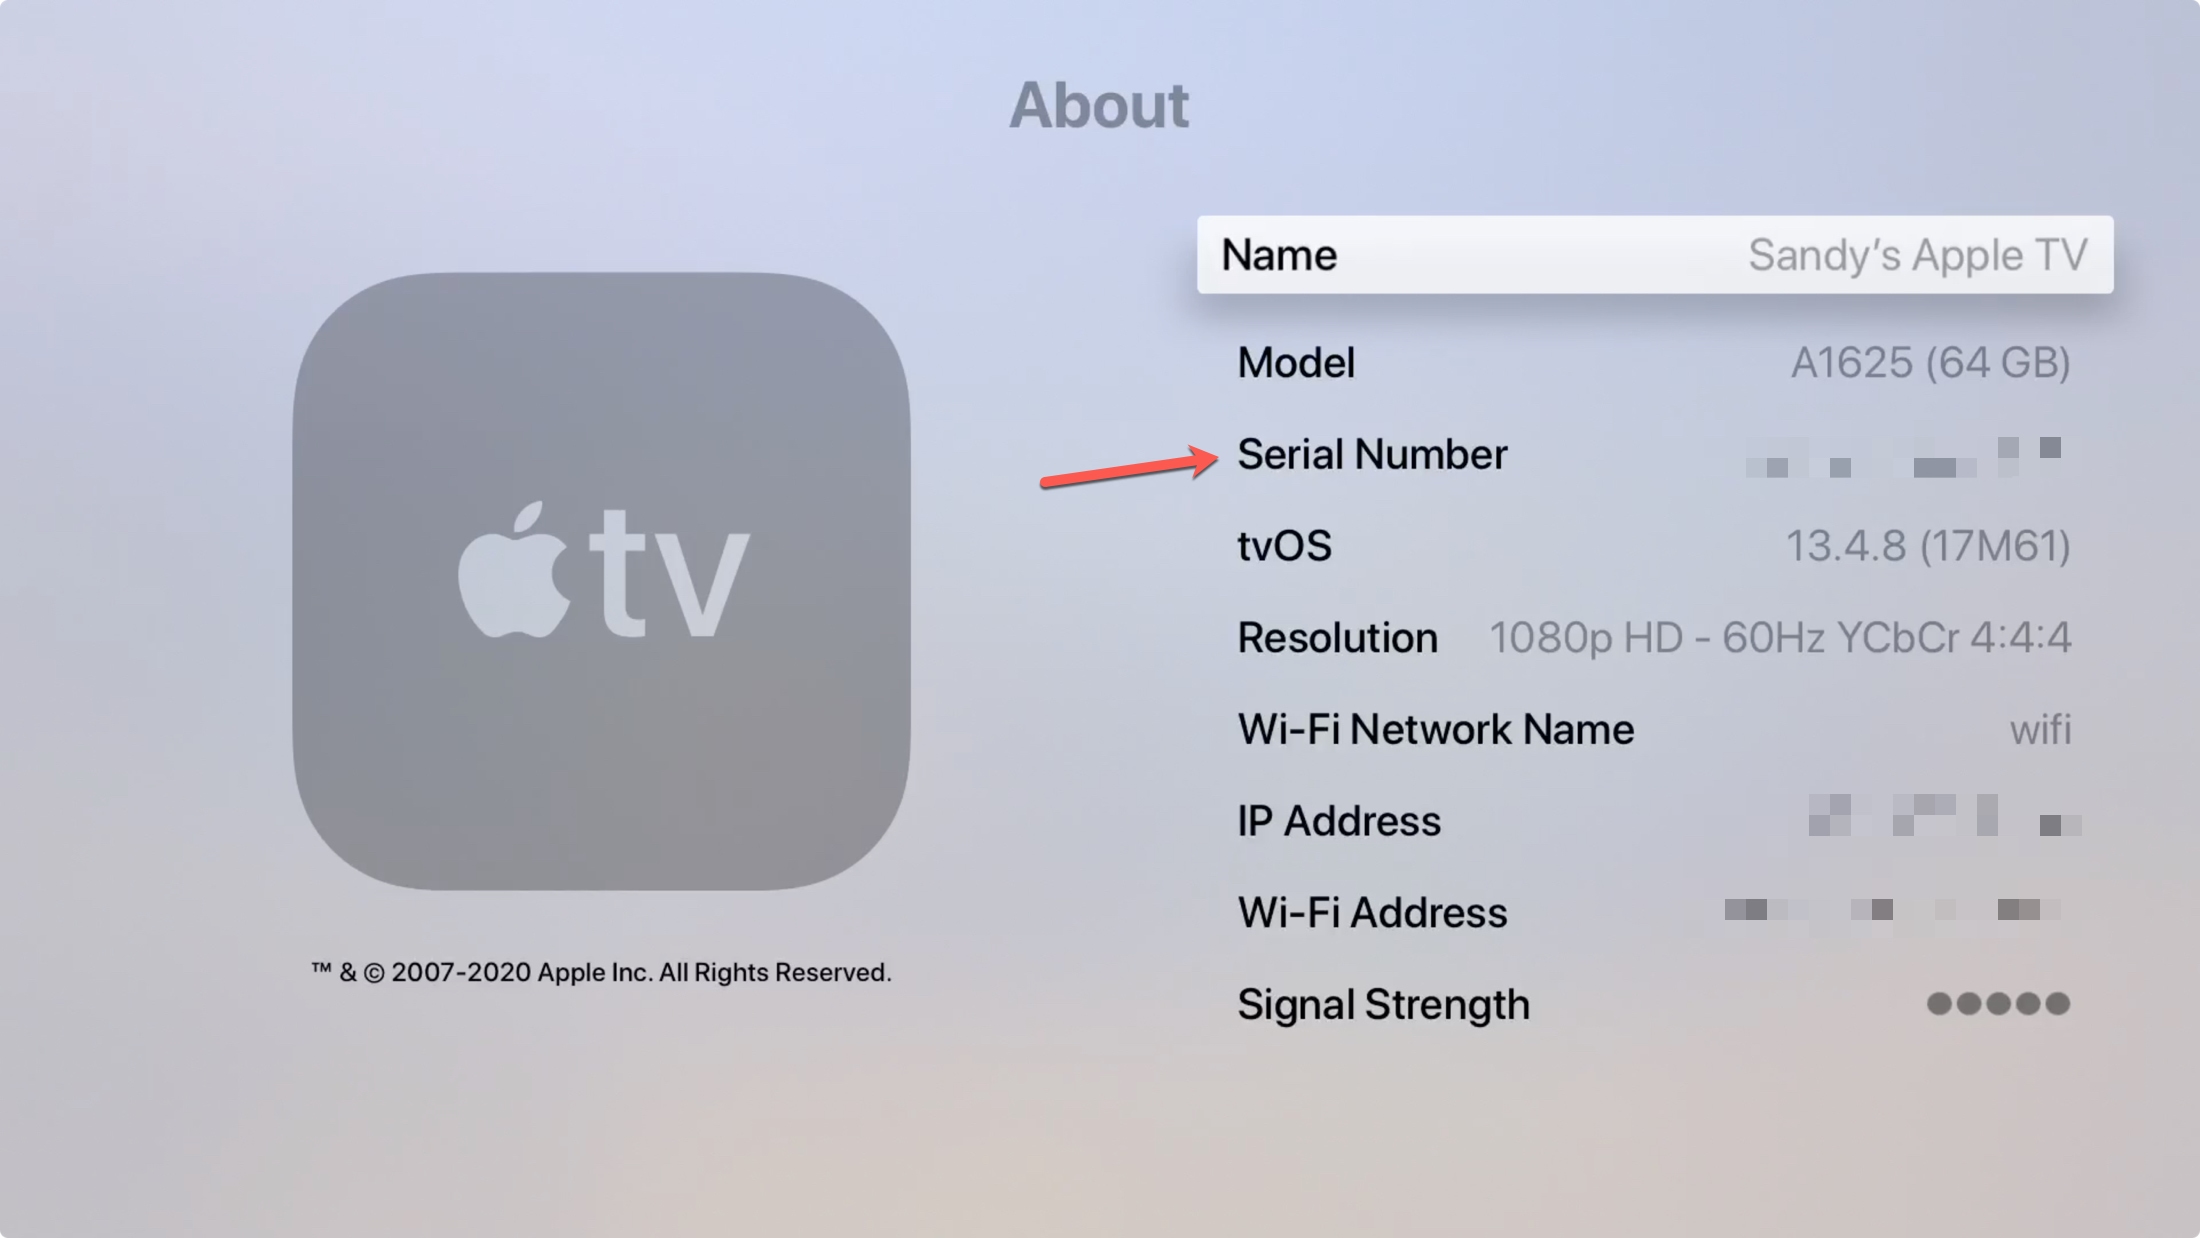 Apple TV Serial Number in About section of Settings